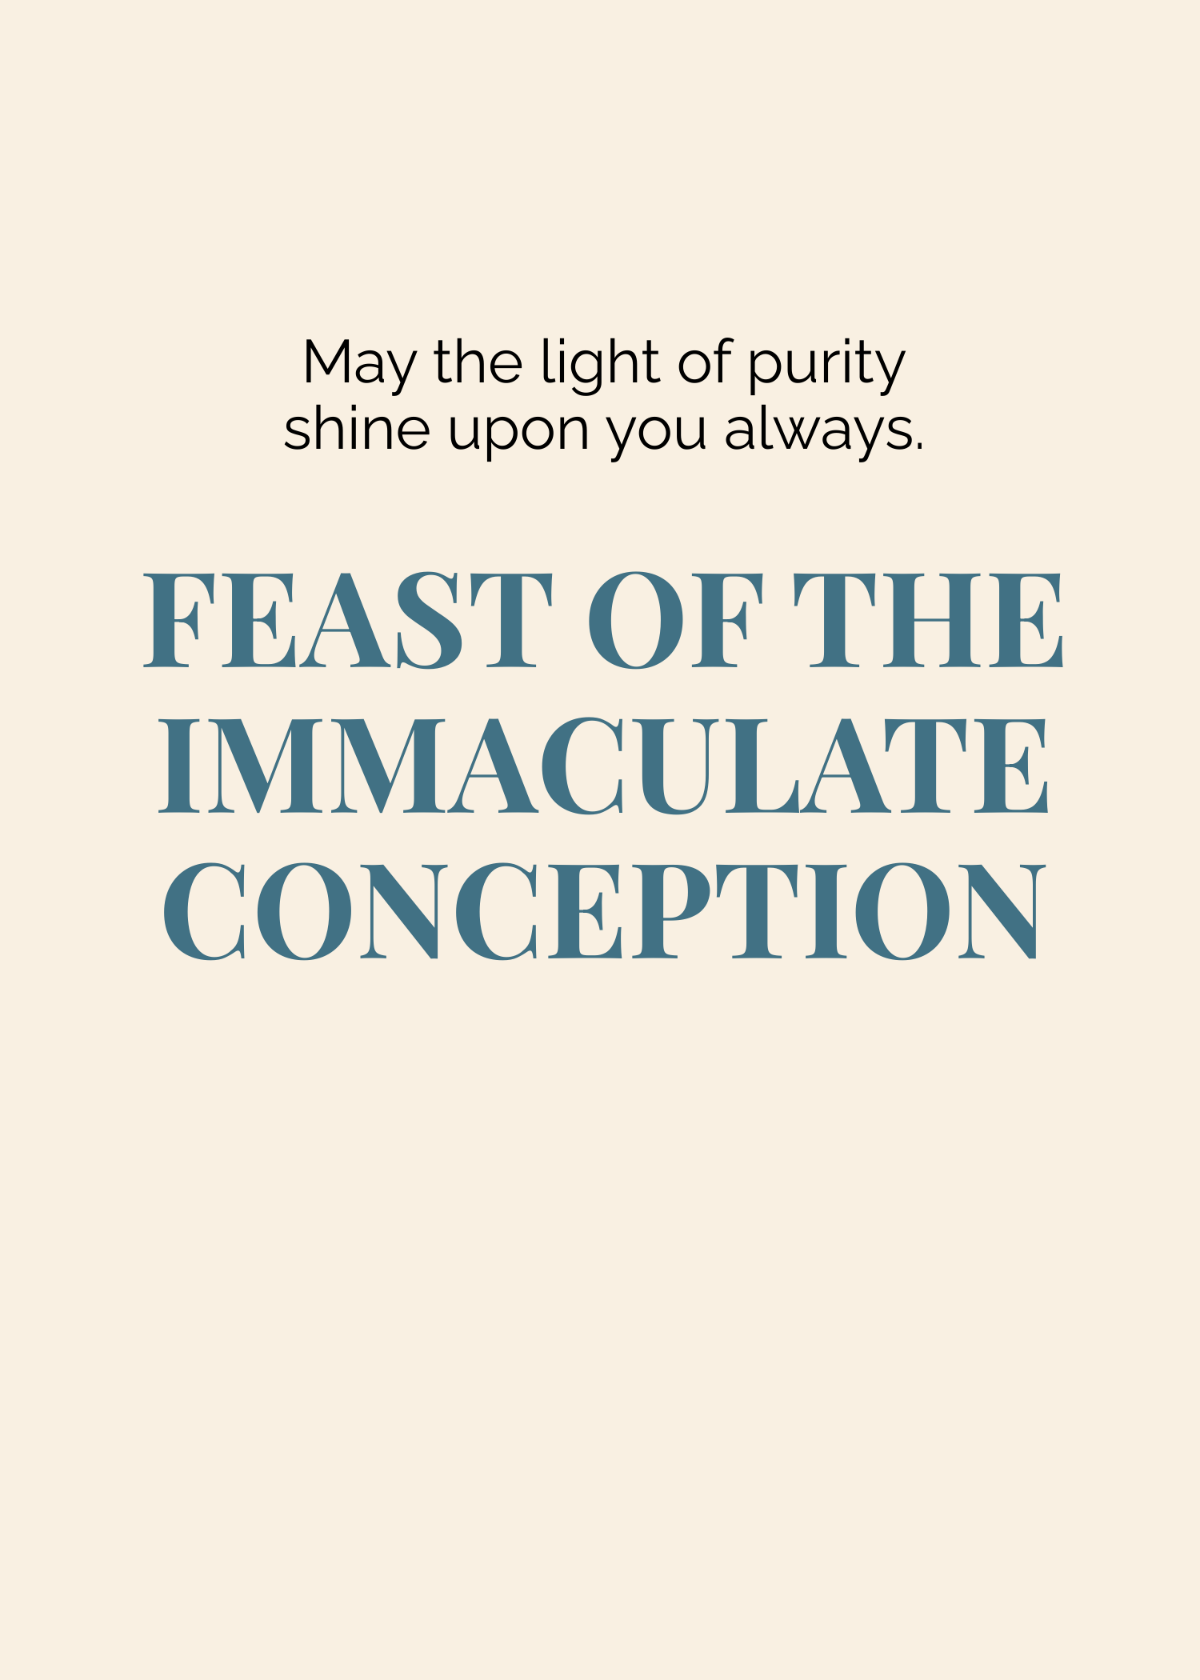 Feast of the Immaculate Conception Message Wishes